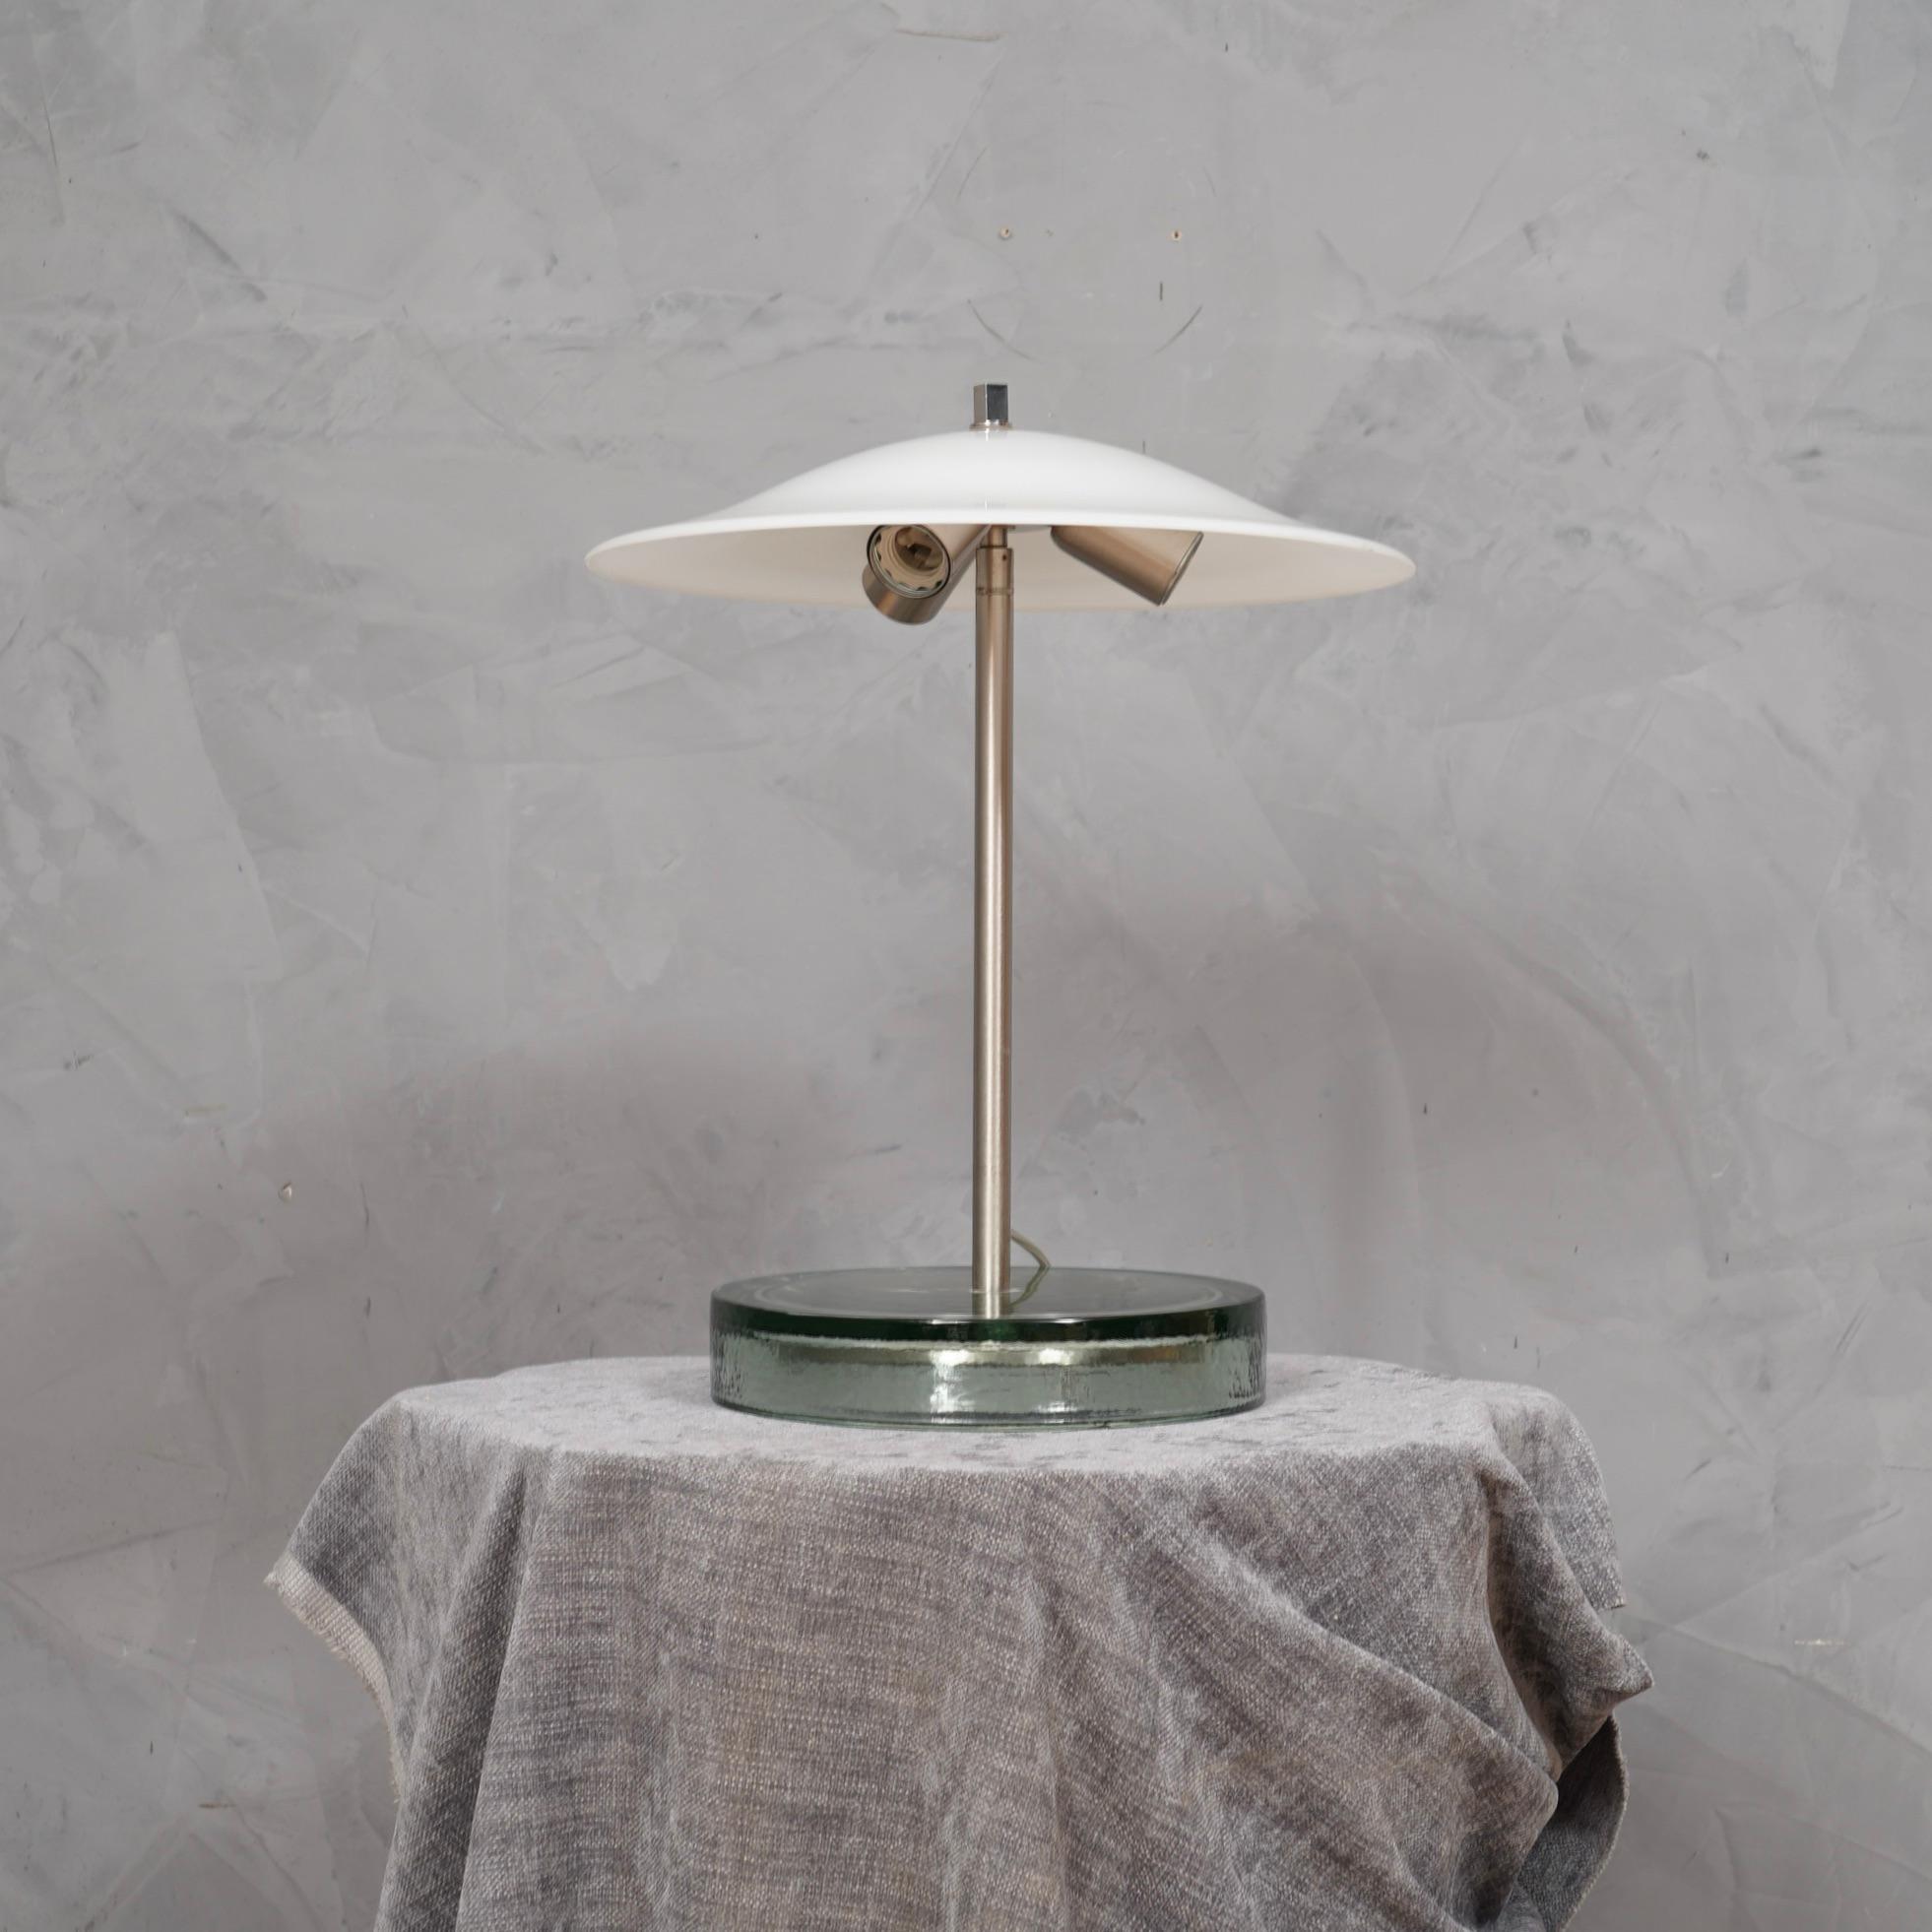 Unmistakable design for these table lamps by Vistosi, certainly very elegant on a beautiful desk.

The lamp is made up of a large transparent glass base from which a satin steel stem comes out centrally to which the three bulbs are fixed. Above all